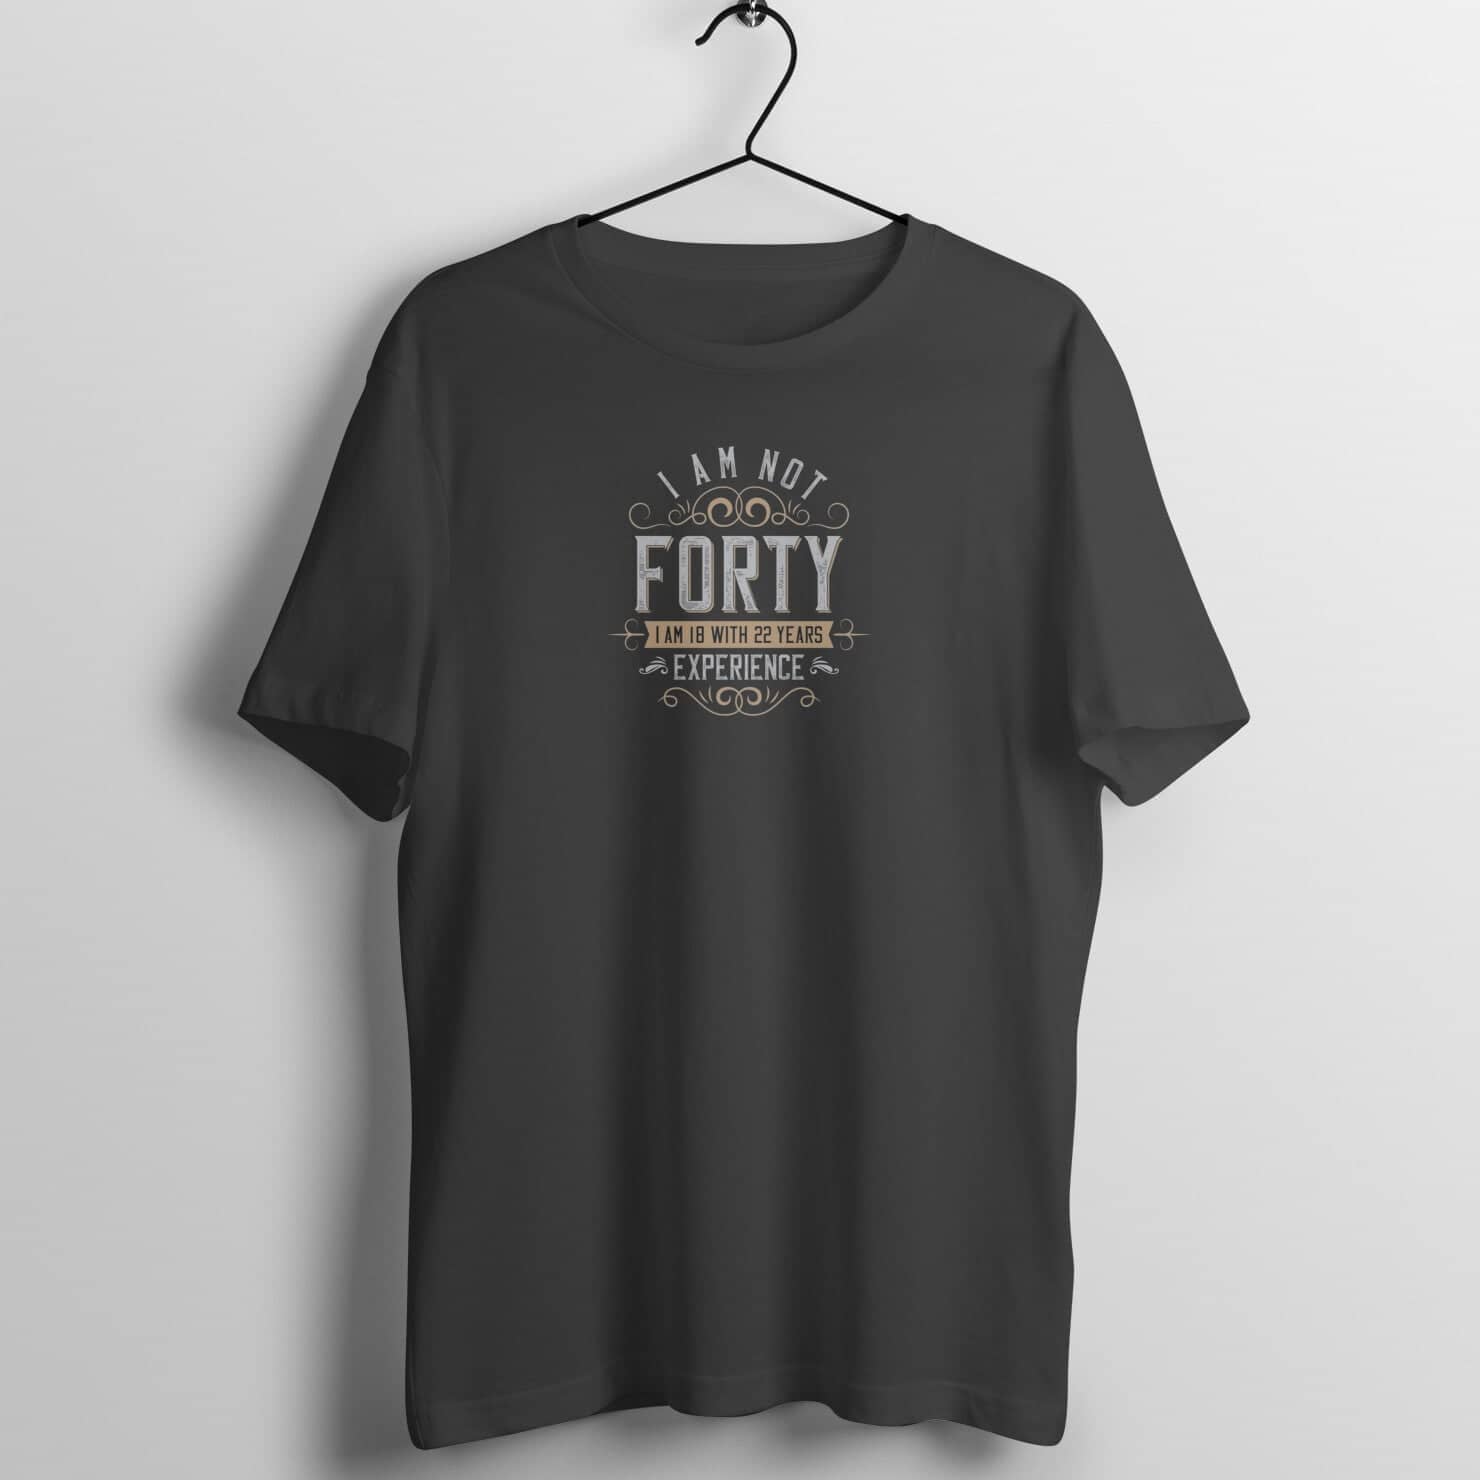 I am Not Forty With 22 Years of Experience Exclusive Black T Shirt for Men and Women Printrove Black S 